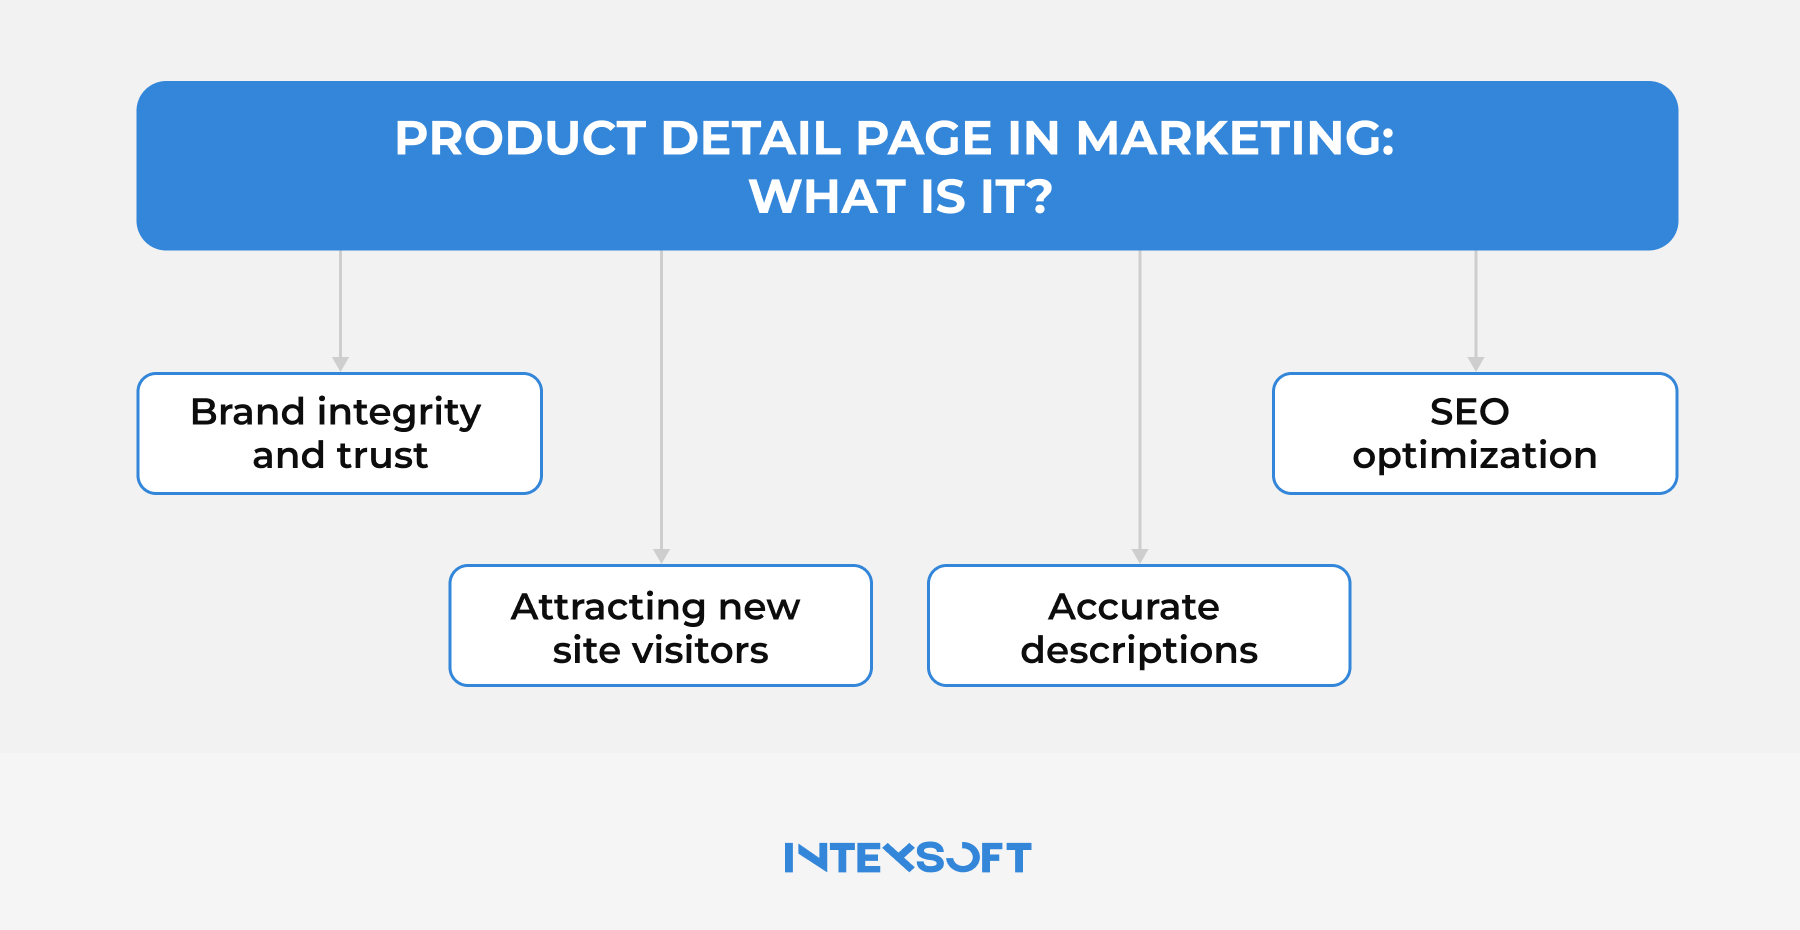 This image shows what the product detail page includes. 